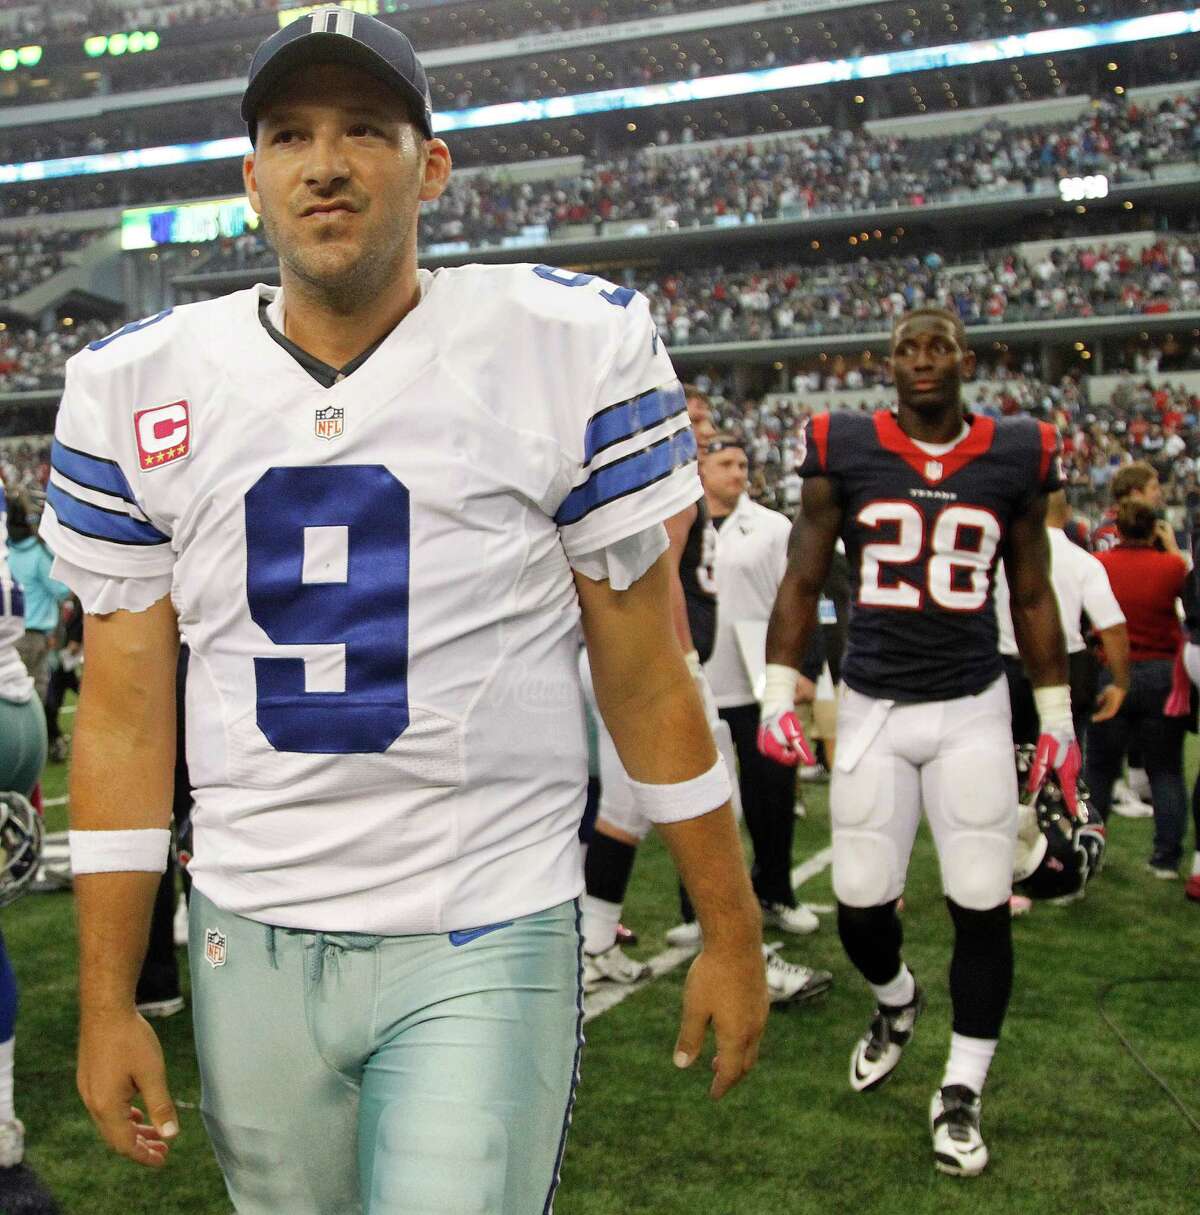 Dallas Cowboys quarterback Tony Romo (9) walks off the field after the Cowboys overtime win over the Houston Texans during an NFL football game at AT&T Stadium, Sunday, Oct. 5, 2014, in Arlington.